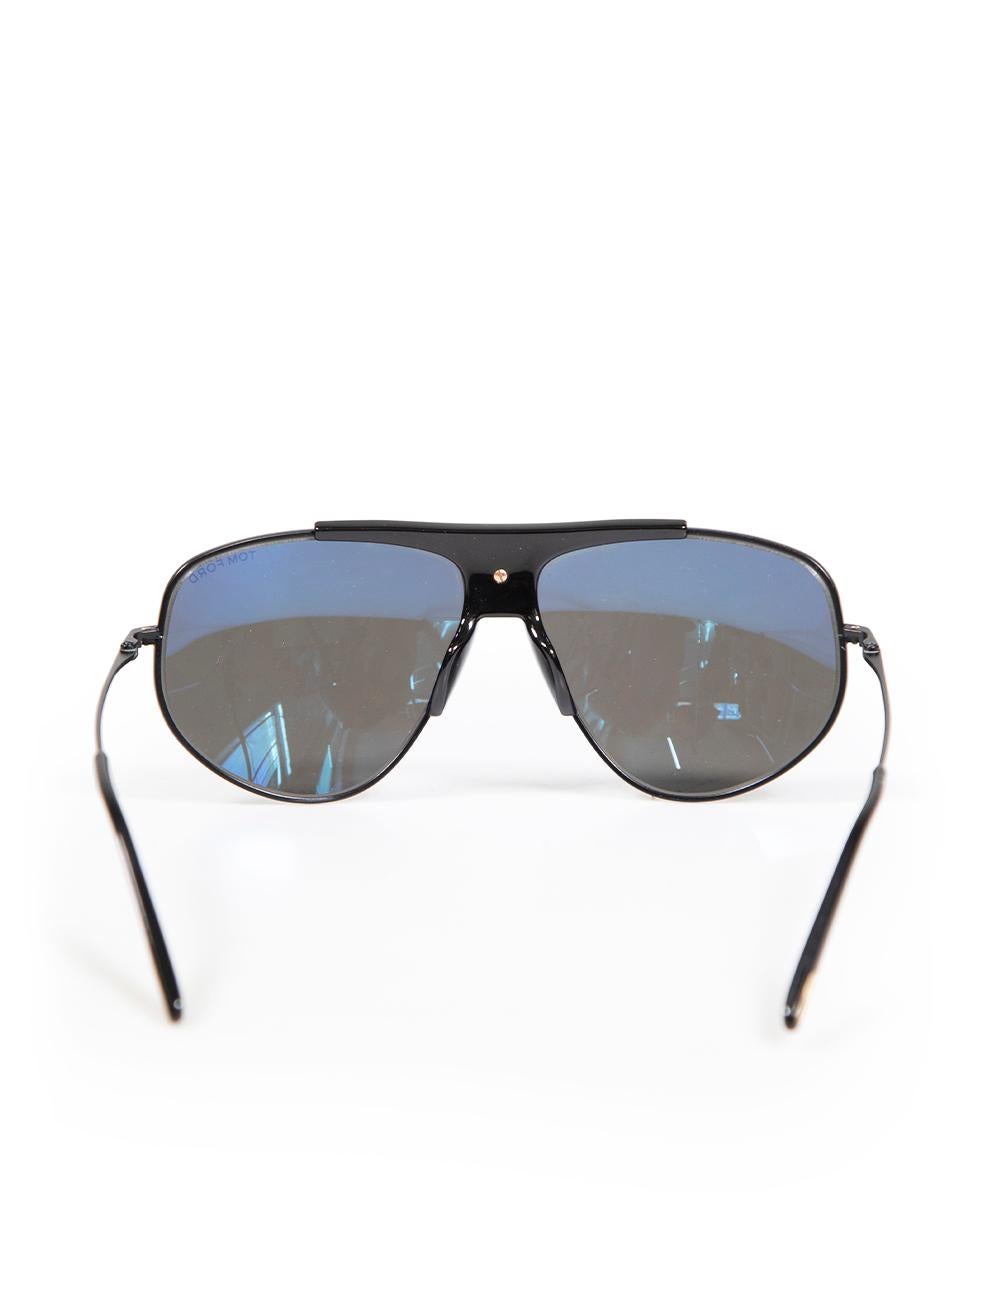 Tom Ford Black FT 0928 Addison Aviator Sunglasses In Excellent Condition For Sale In London, GB